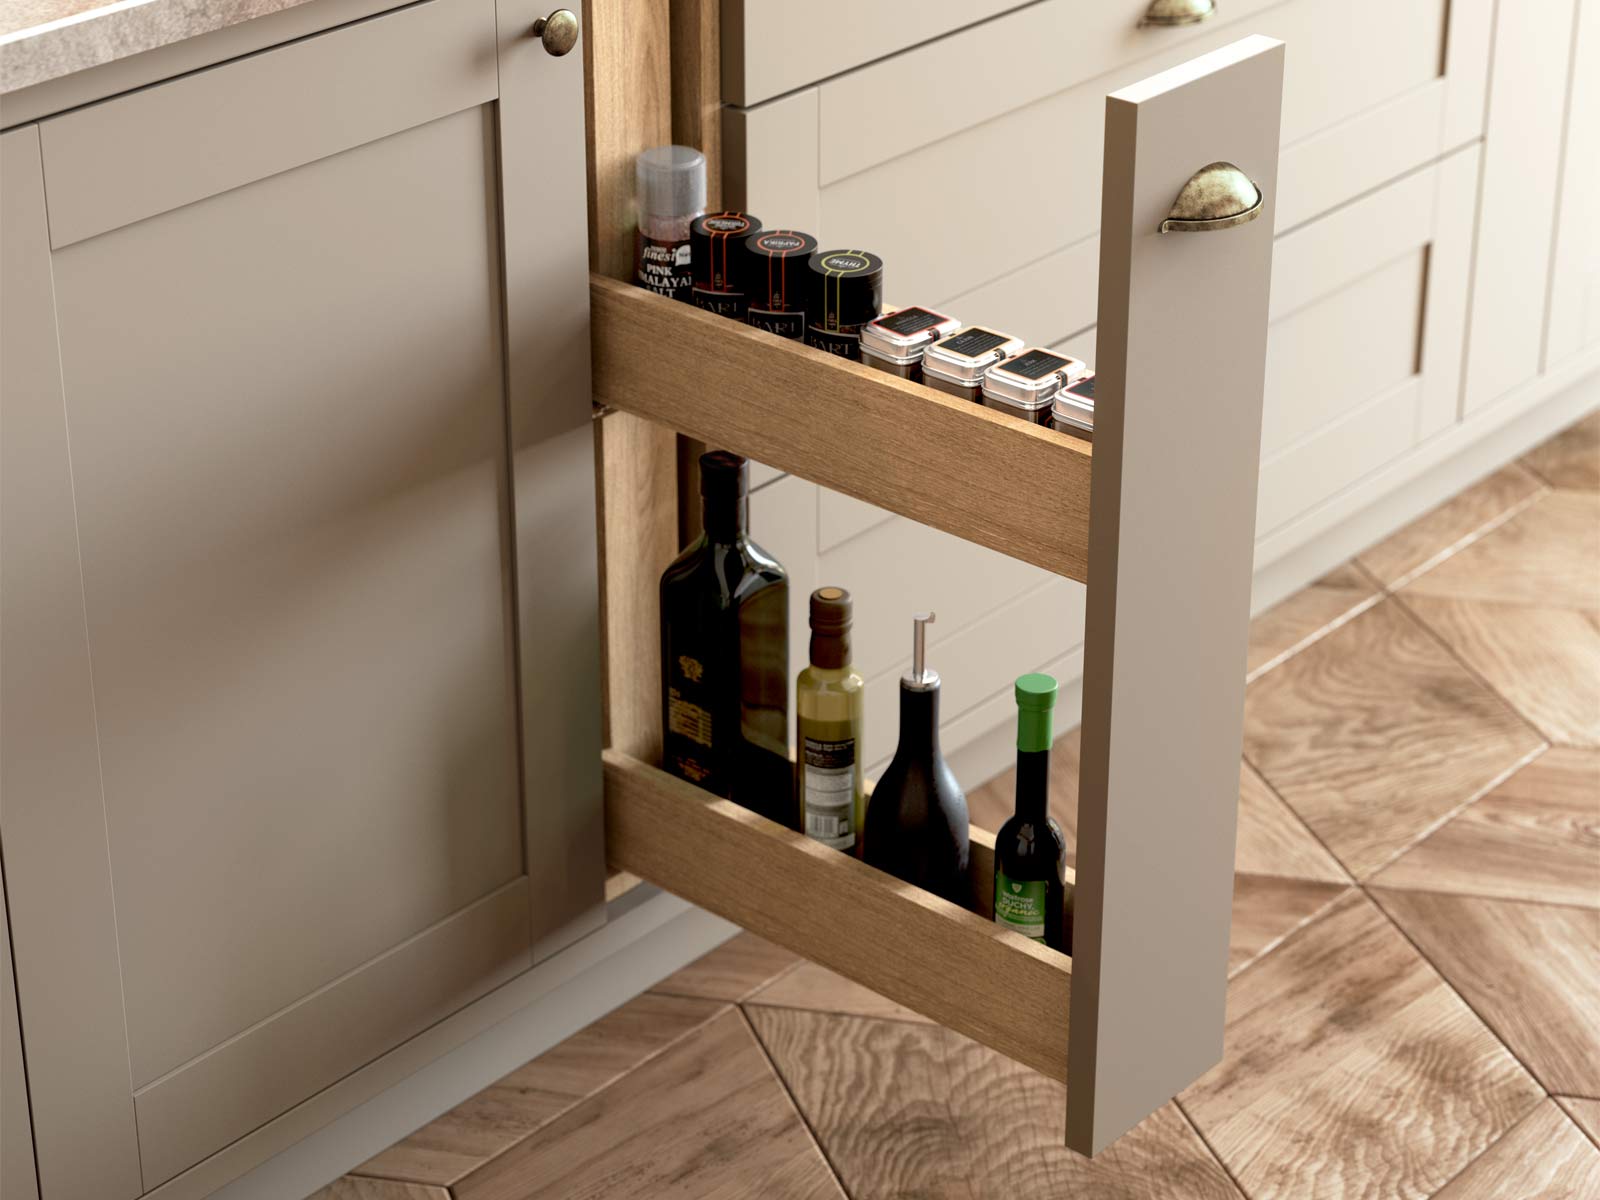 The larder kitchen unit pull-out storage system